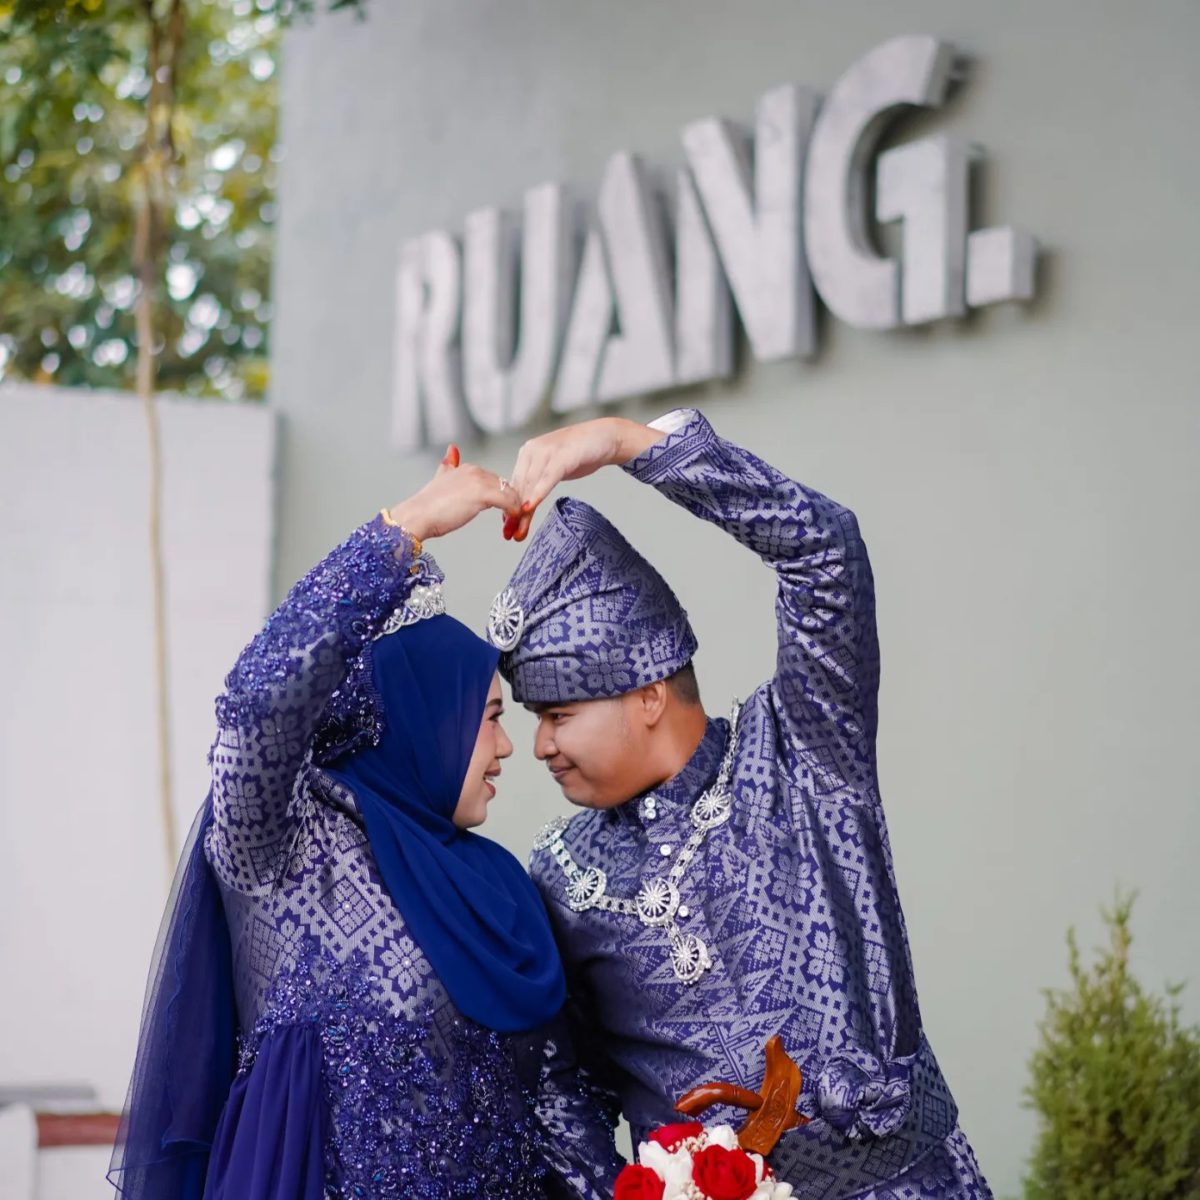 RUANG event space